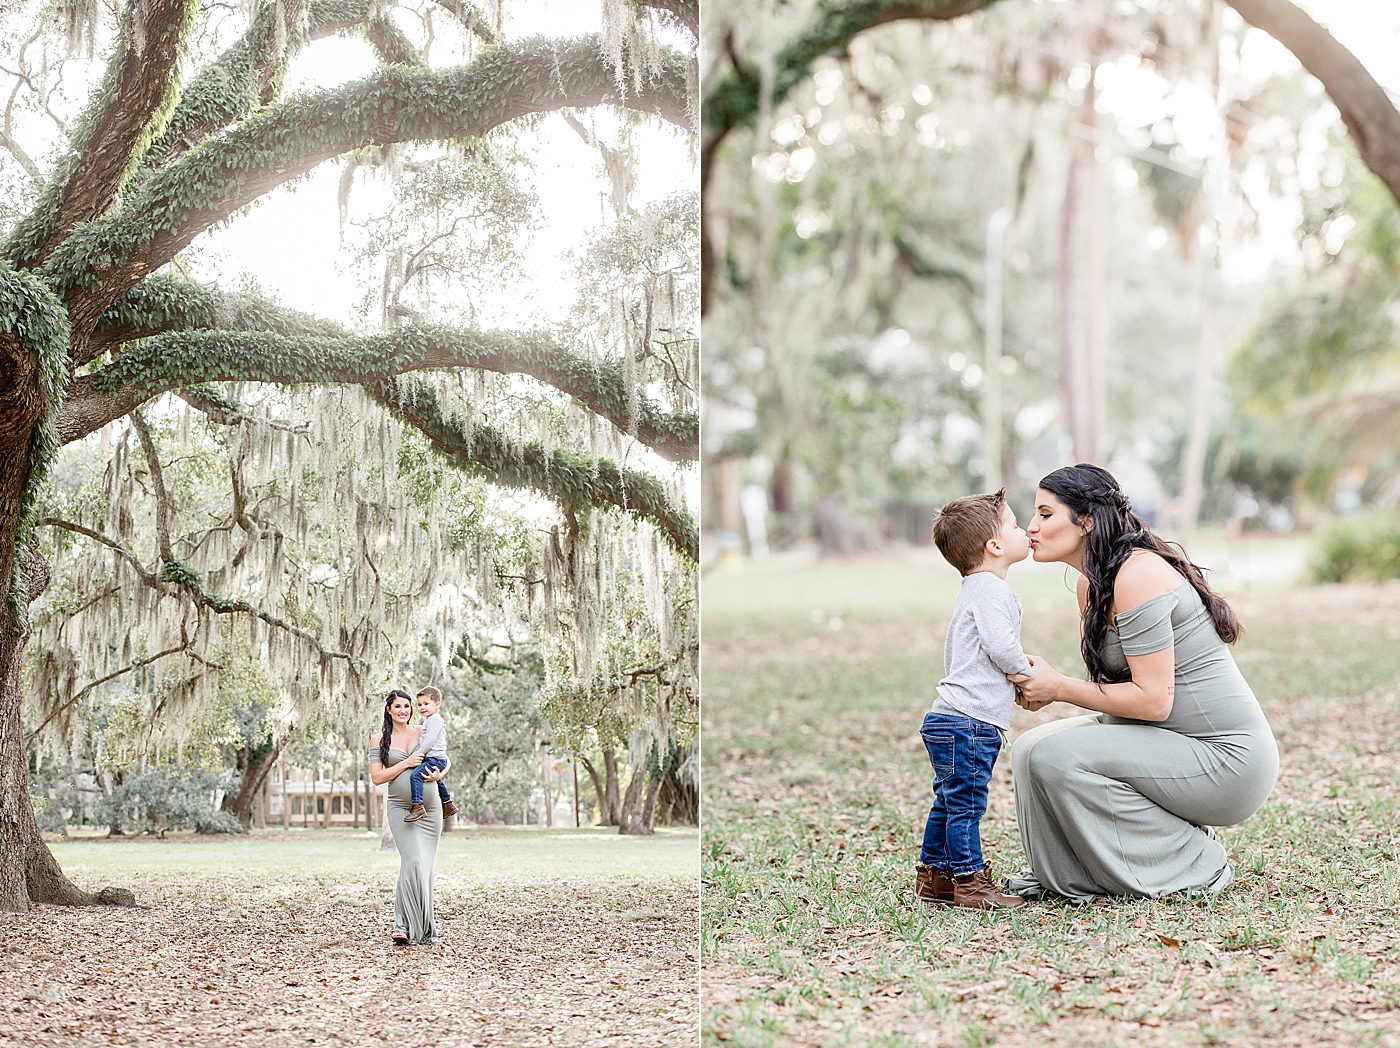 Kiermaier Family Maternity Session with Baby #2 Under the Oaks